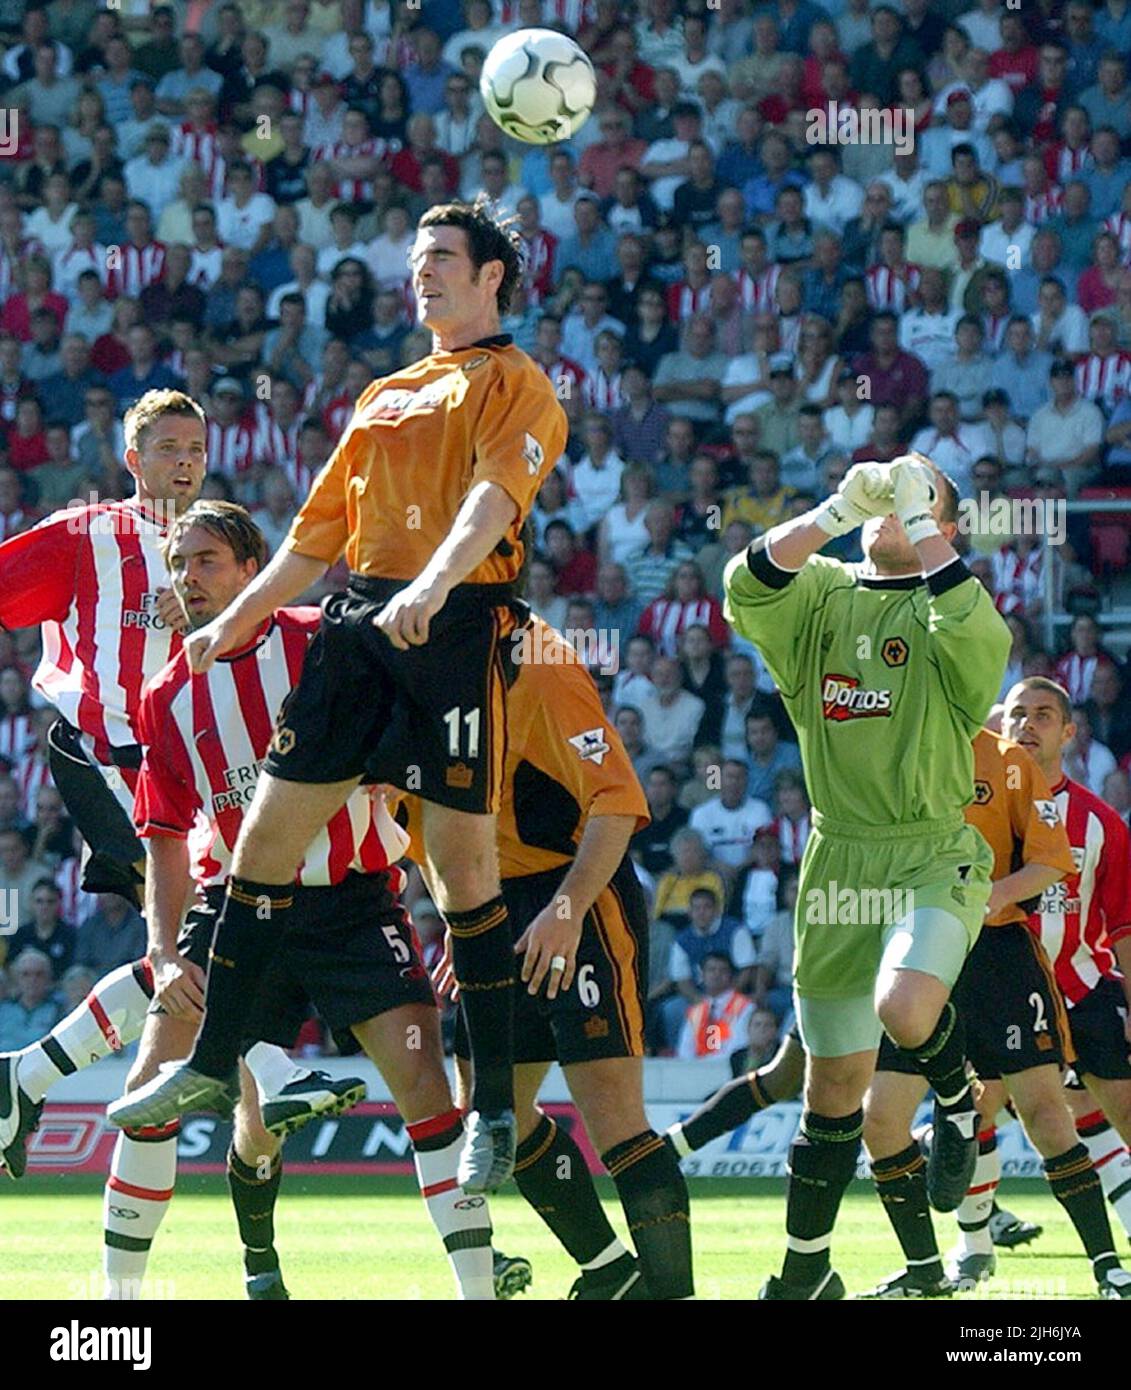 SOUTHAMPTON V WOLVES, ST MARY'S, SO'T'ON.13/09 MICHAEL OAKES, THE WOLVES 'KEEPER, PREPARES TO STOP A HEADER FROM SOUTHAMPTON No11 MARK KENNEDY. PIC MIKE WALKER, 2003 Stock Photo